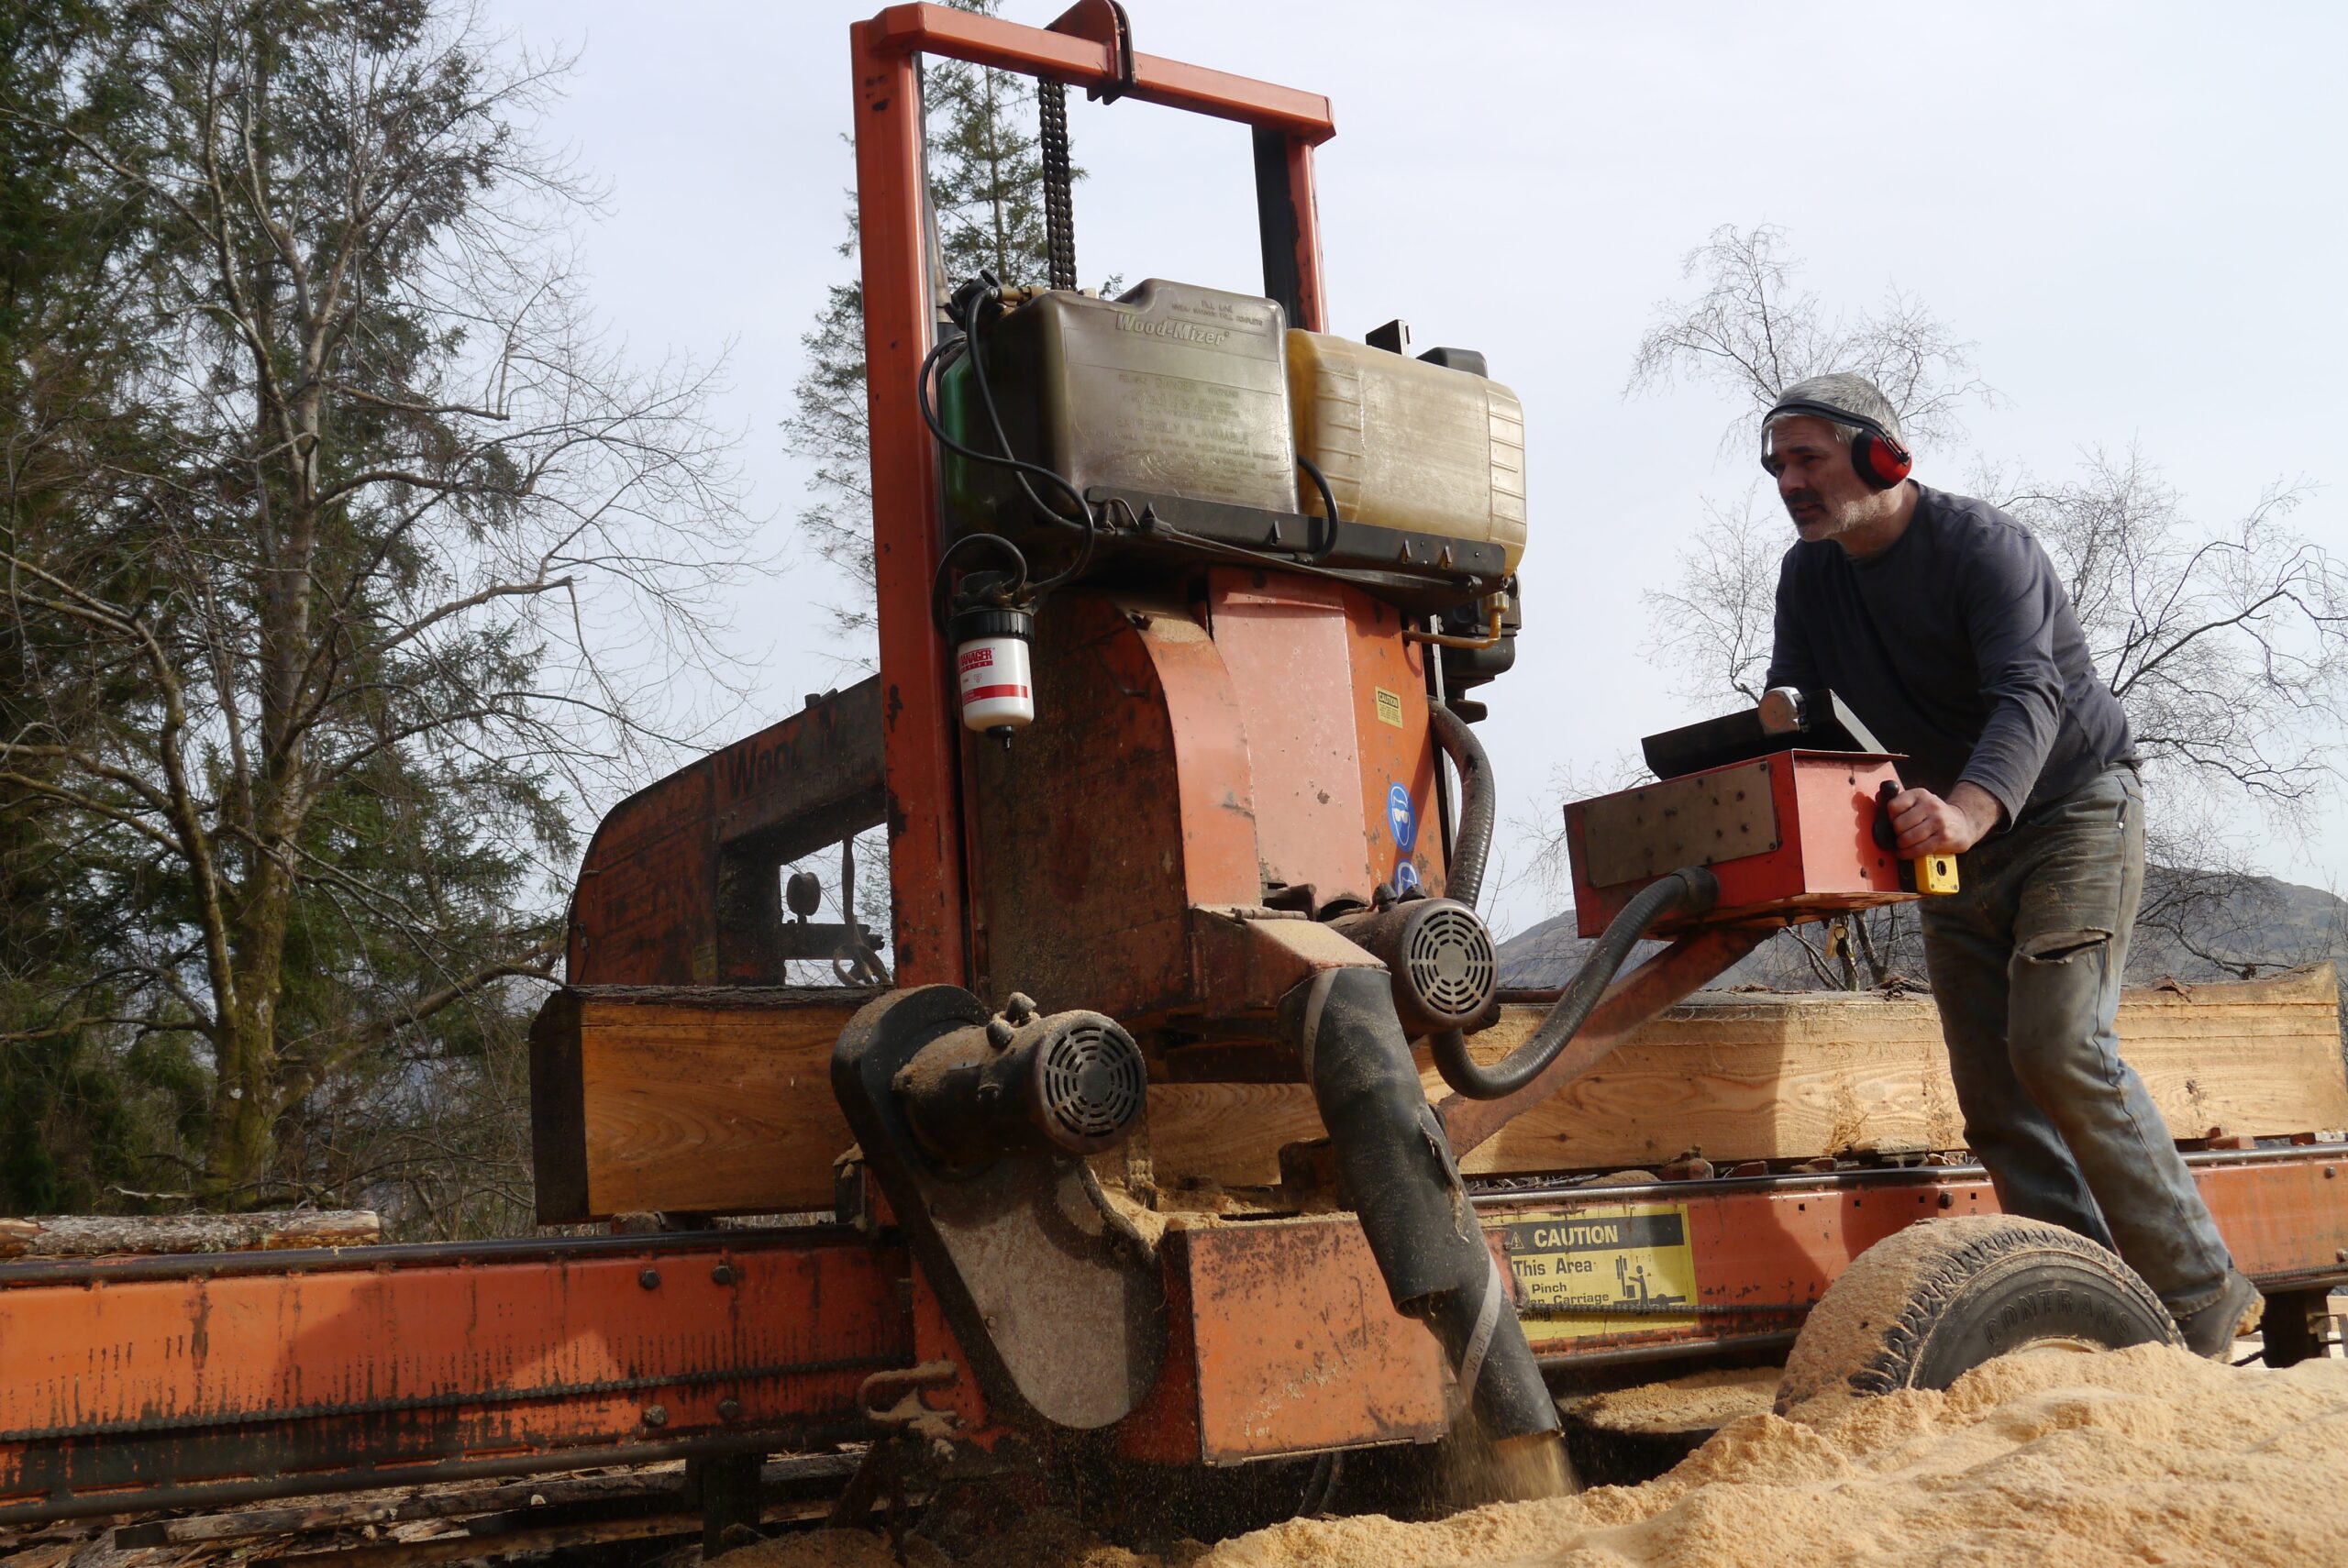 Scottish Forestry has approved a grant of £15,386 towards the purchase of a new electric sawmill by the Knoydart Forest Trust.